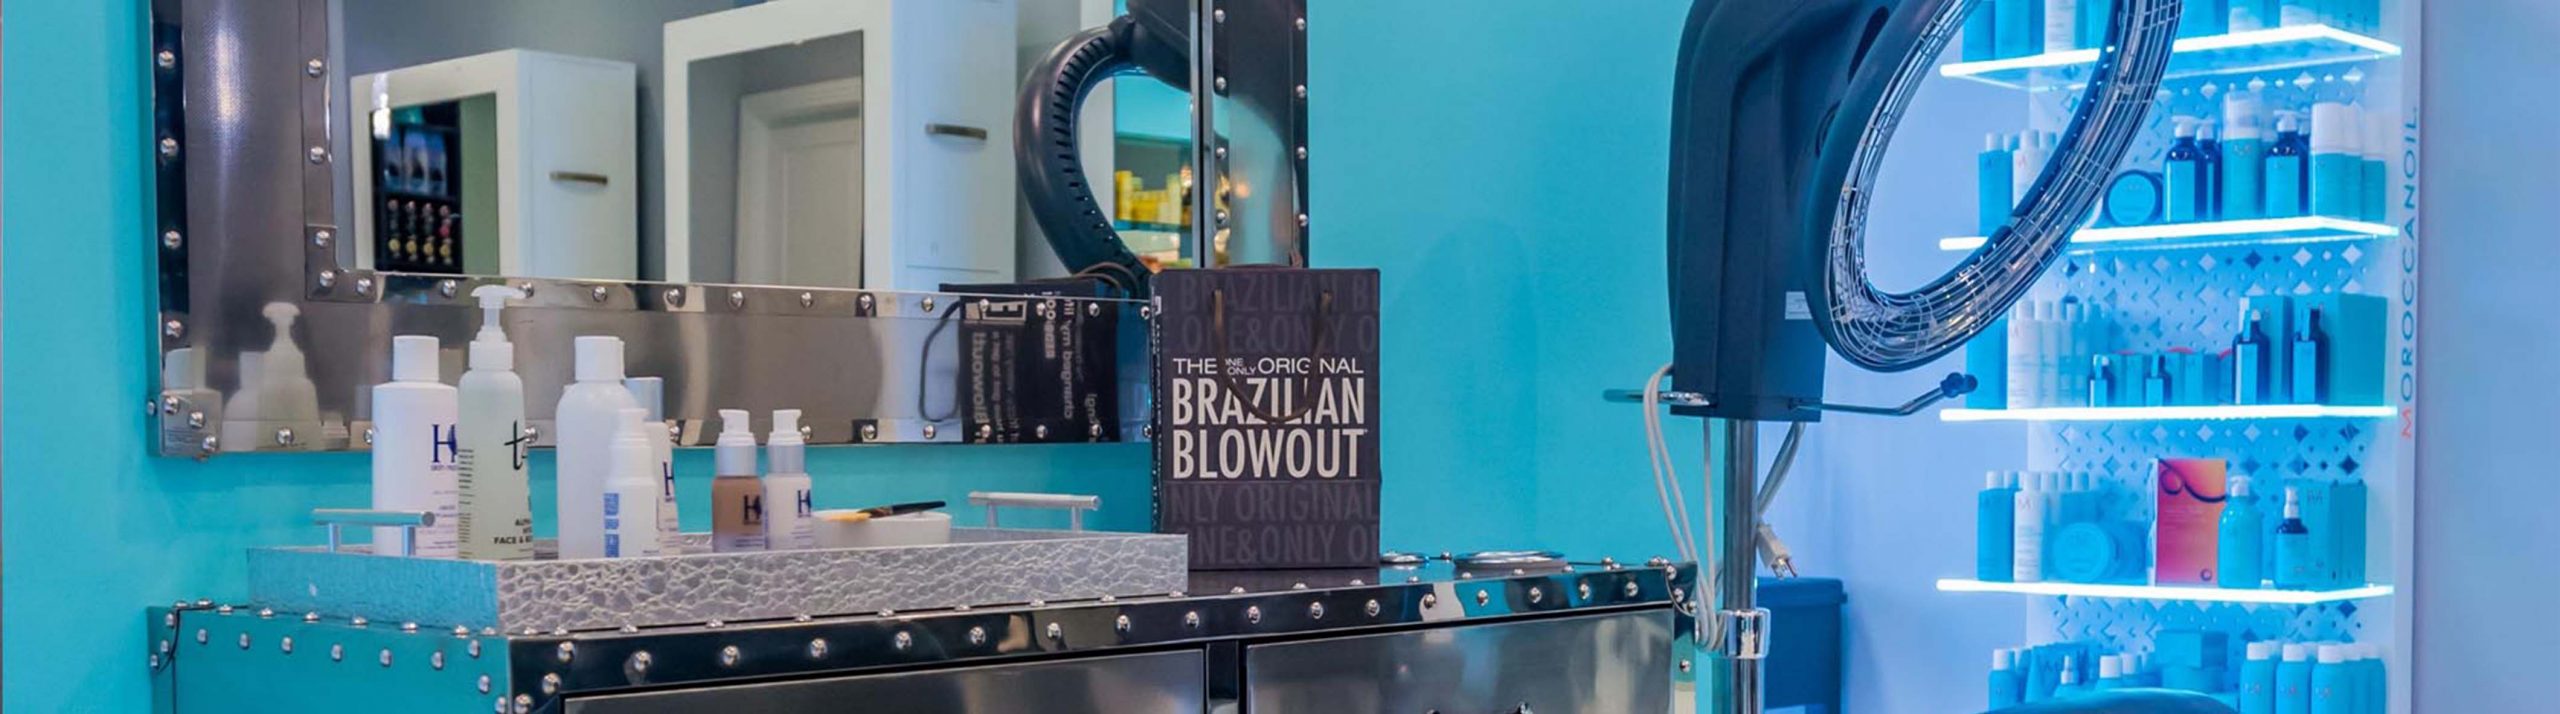 Hair Salon Station with a Package for Brazilian Blowout